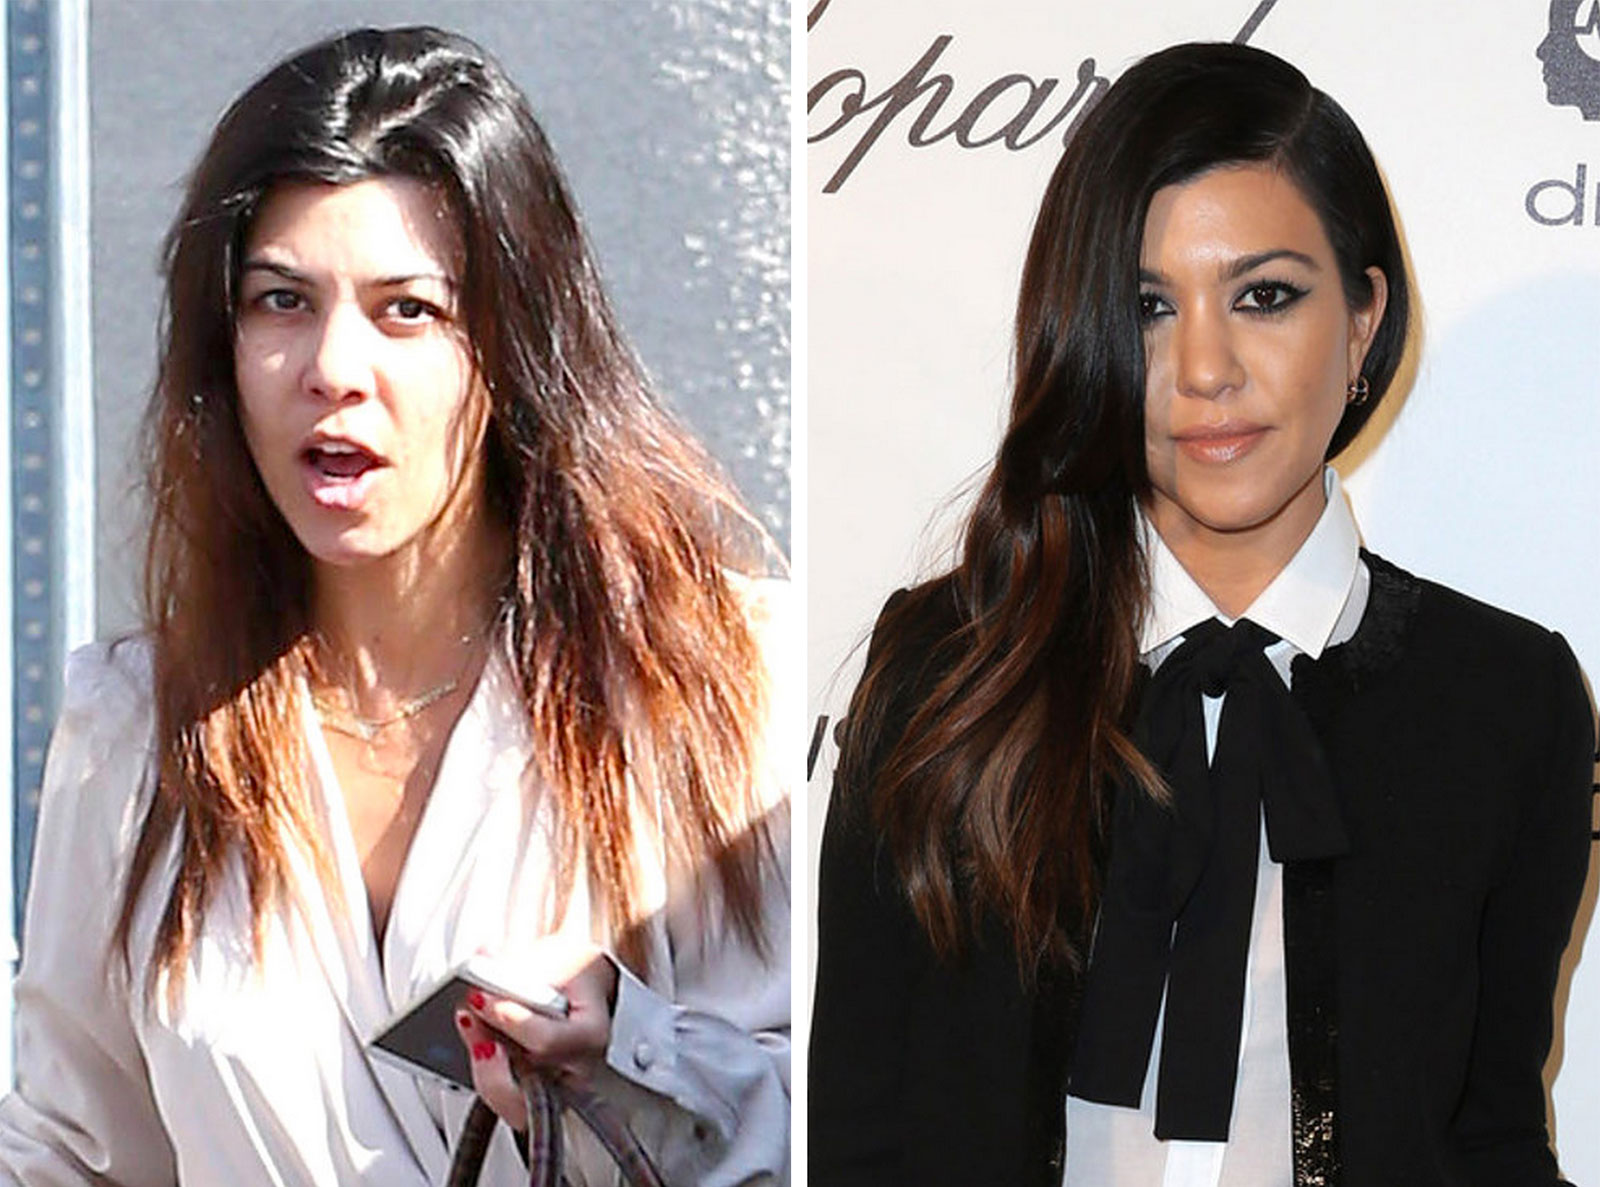 How The Kardashian Sisters Look Without Makeup - Gallery | eBaum's World